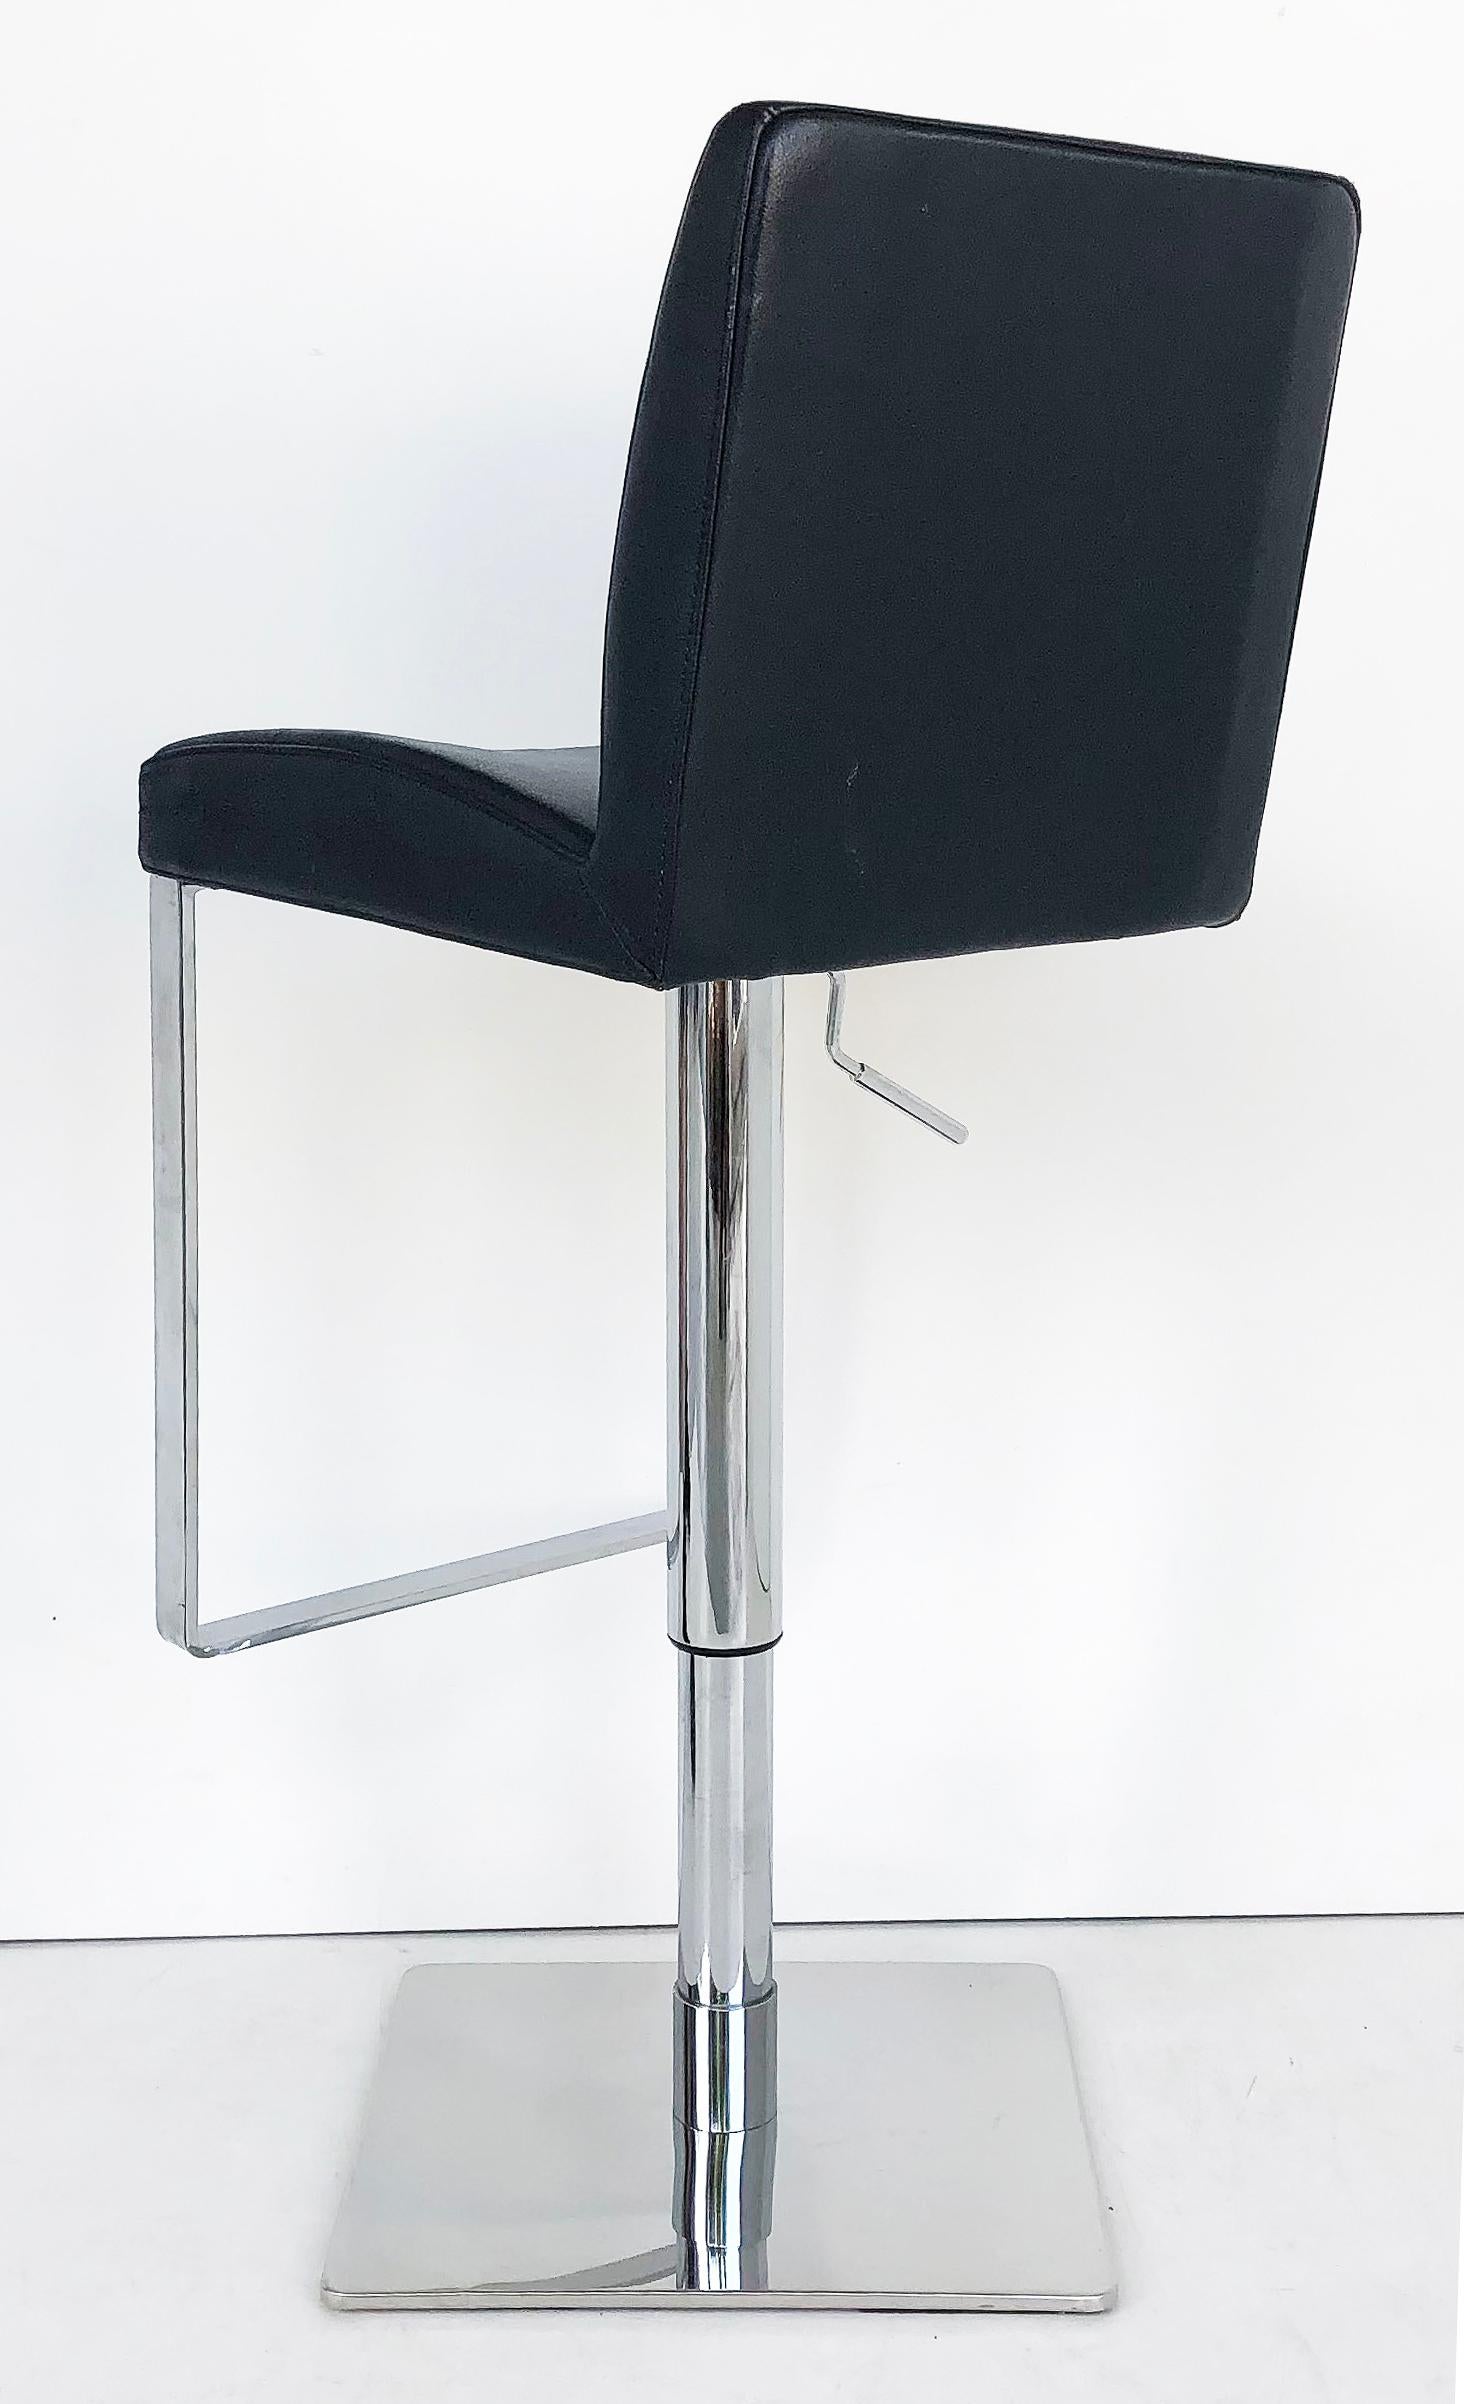 Contemporary Adjustable Stainless Steel/Leather Counter/Bar Stools, Set of 3 For Sale